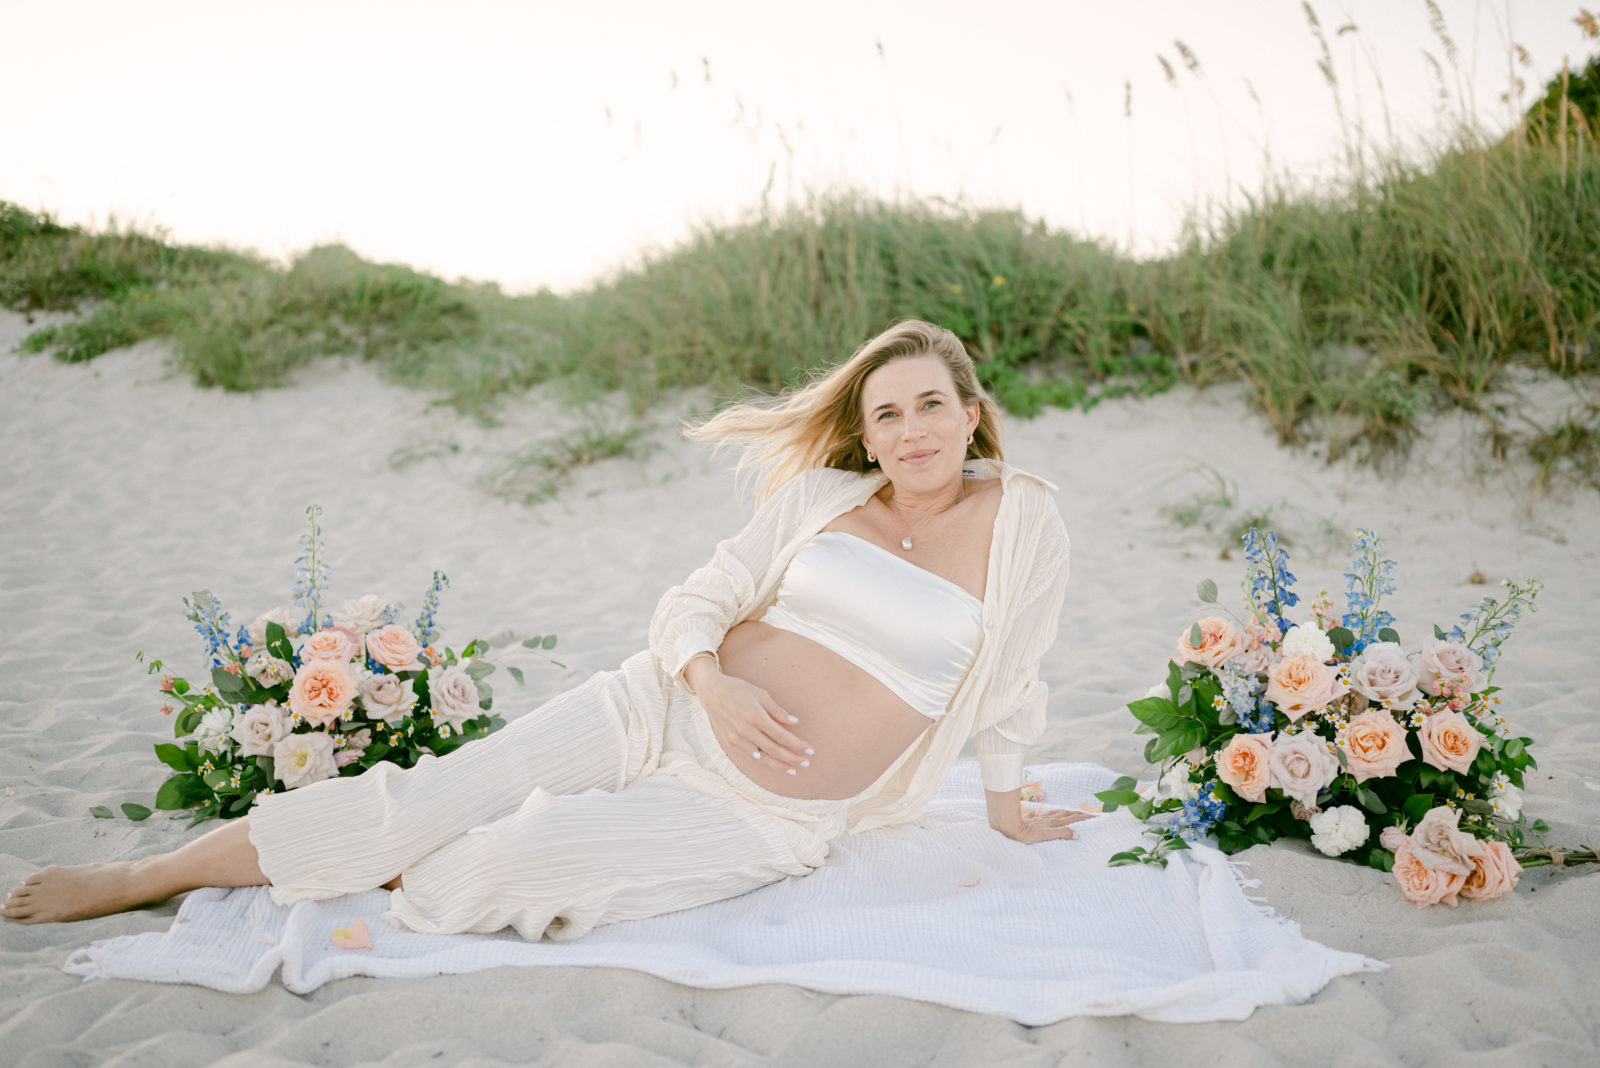 Flower design in Key Biscayne during a maternity photoshoot